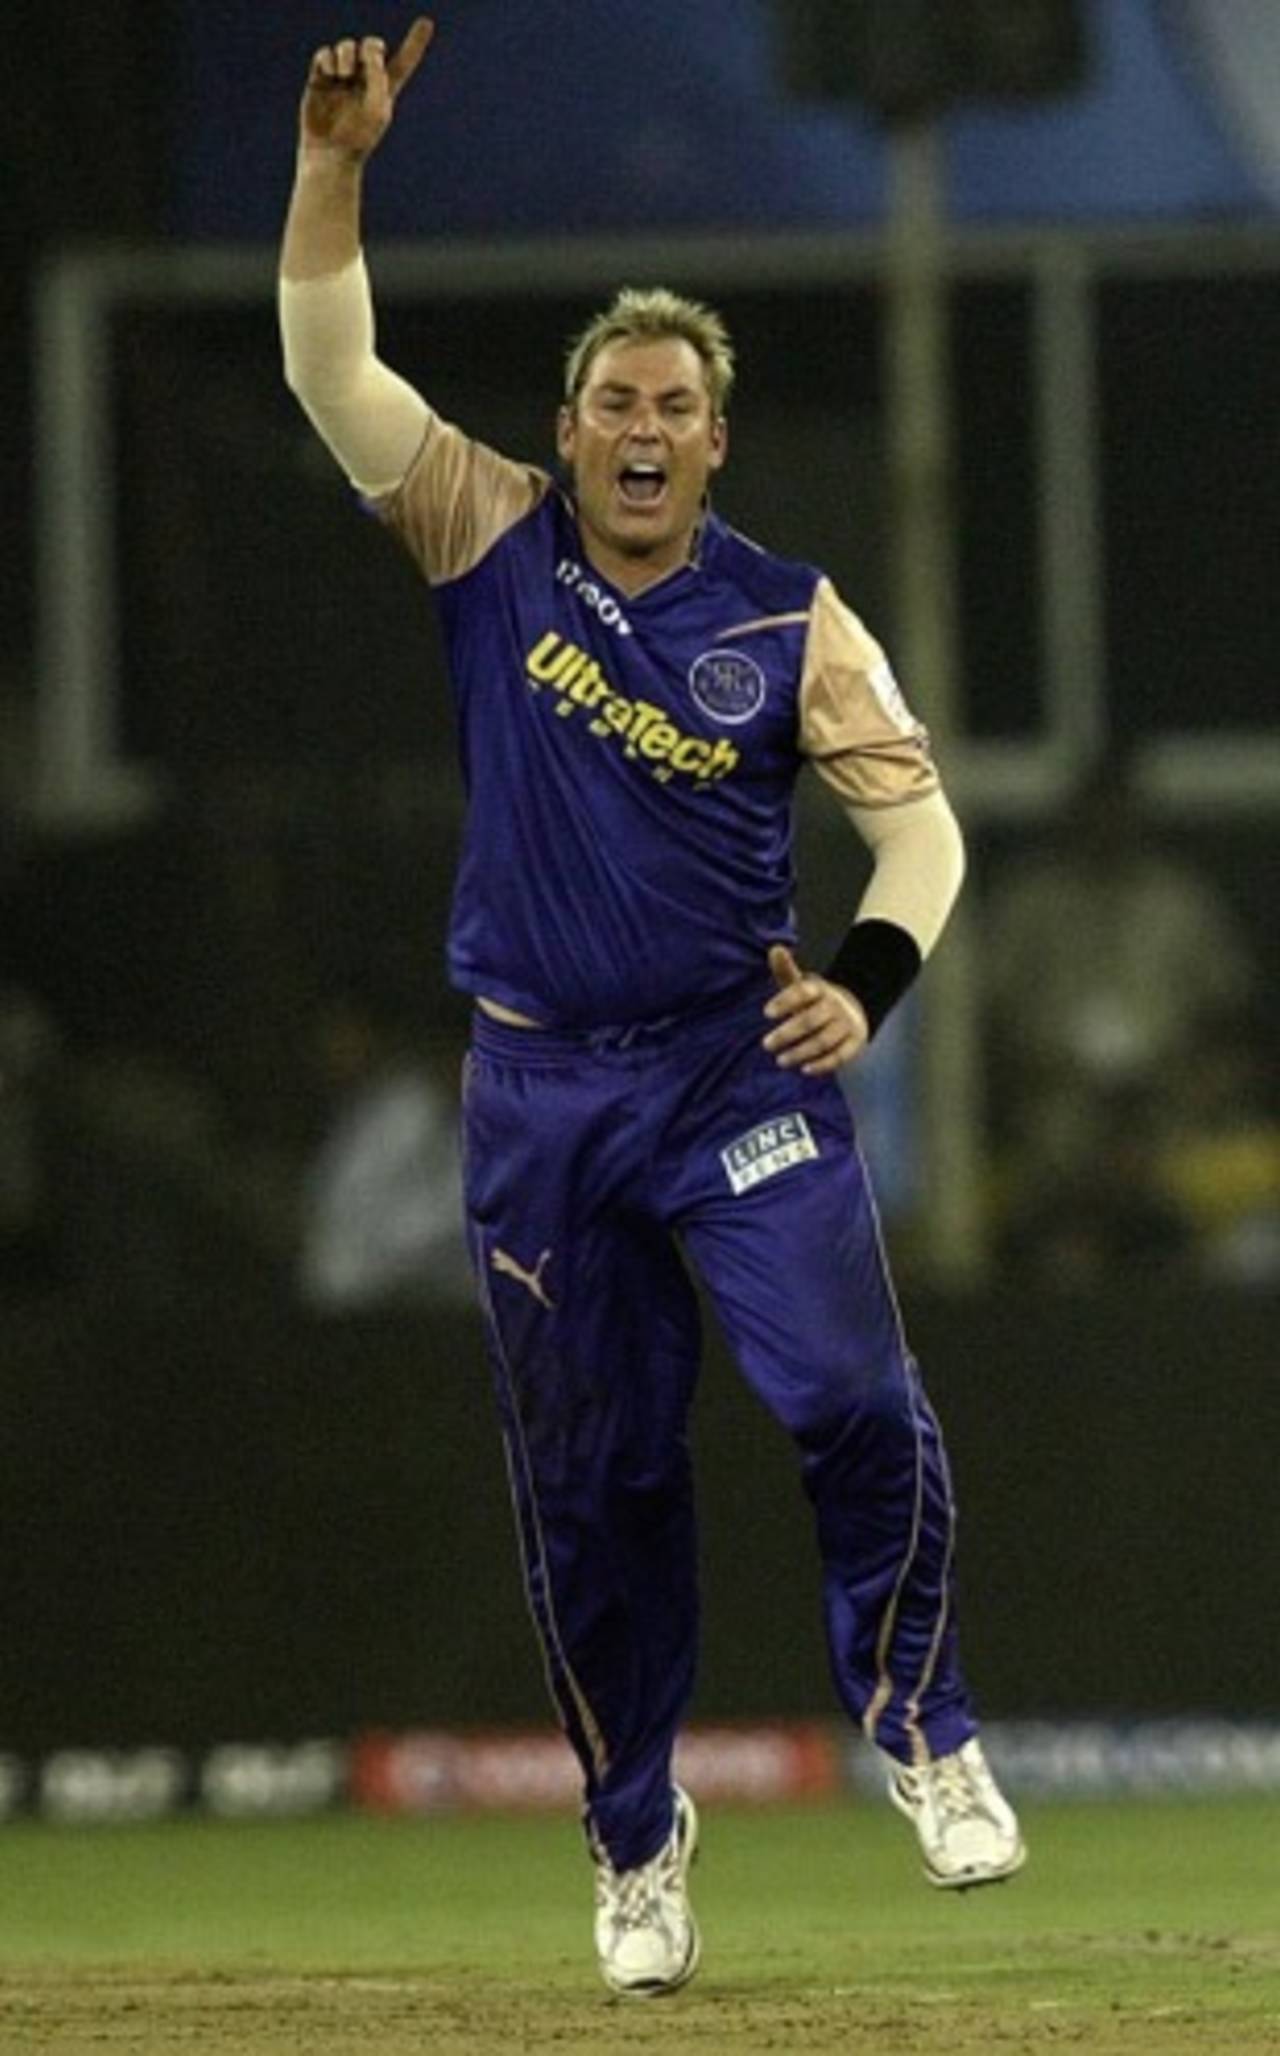 Rajasthan will rely on their experienced players like Shane Warne to guide what will be a team filled with young players&nbsp;&nbsp;&bull;&nbsp;&nbsp;Indian Premier League